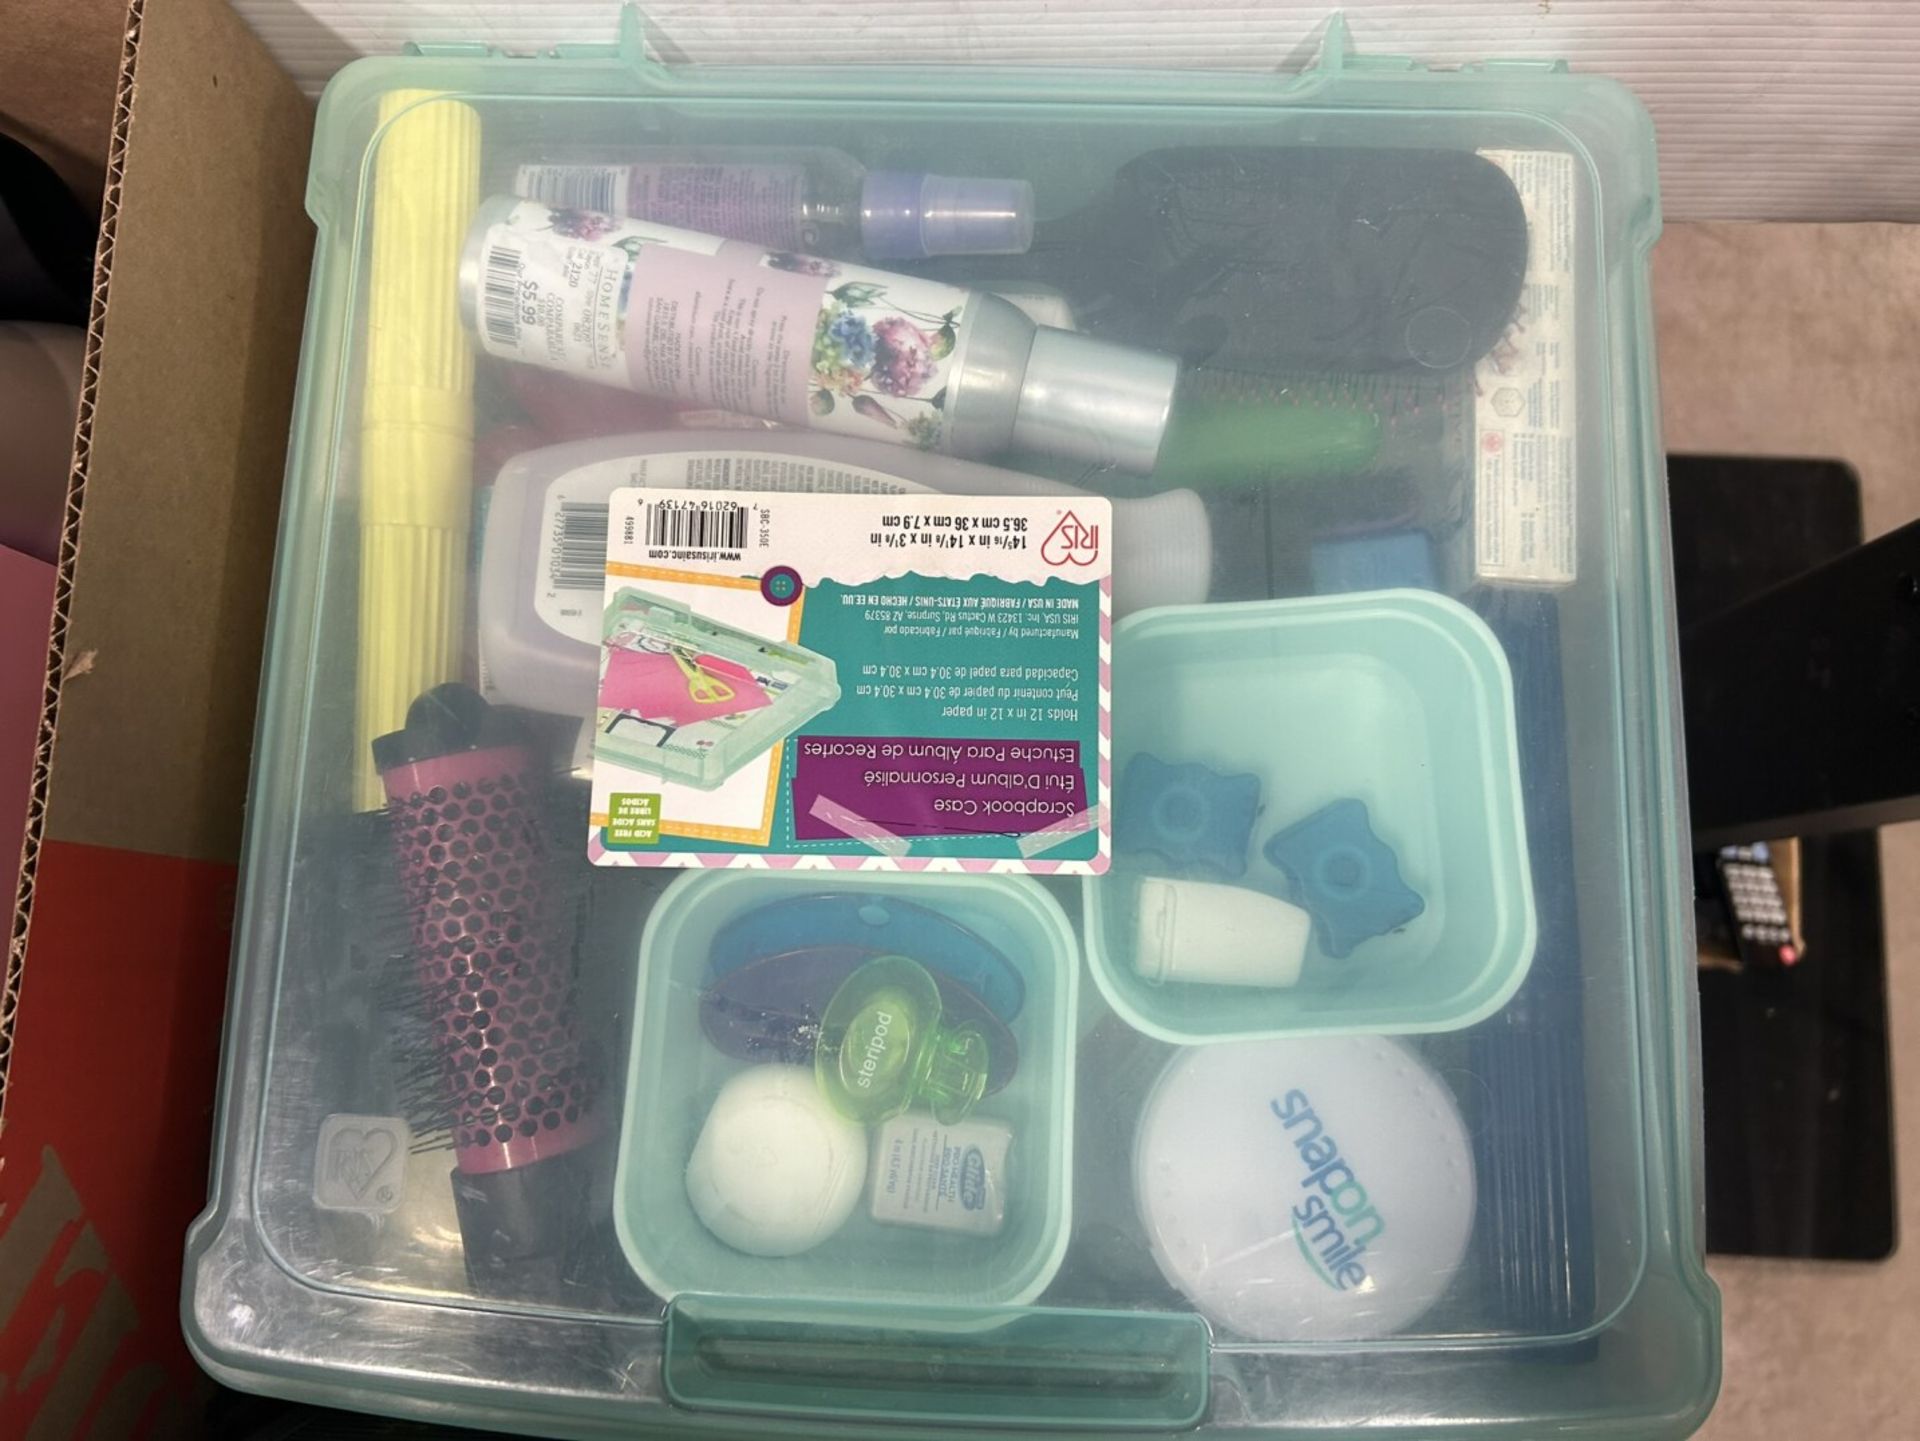 L/O ASSORTED BATHROOM ITEMS, CURLING IRONS, HAIR DRYER, PERSONAL GROOMING, ETC. - Image 10 of 24